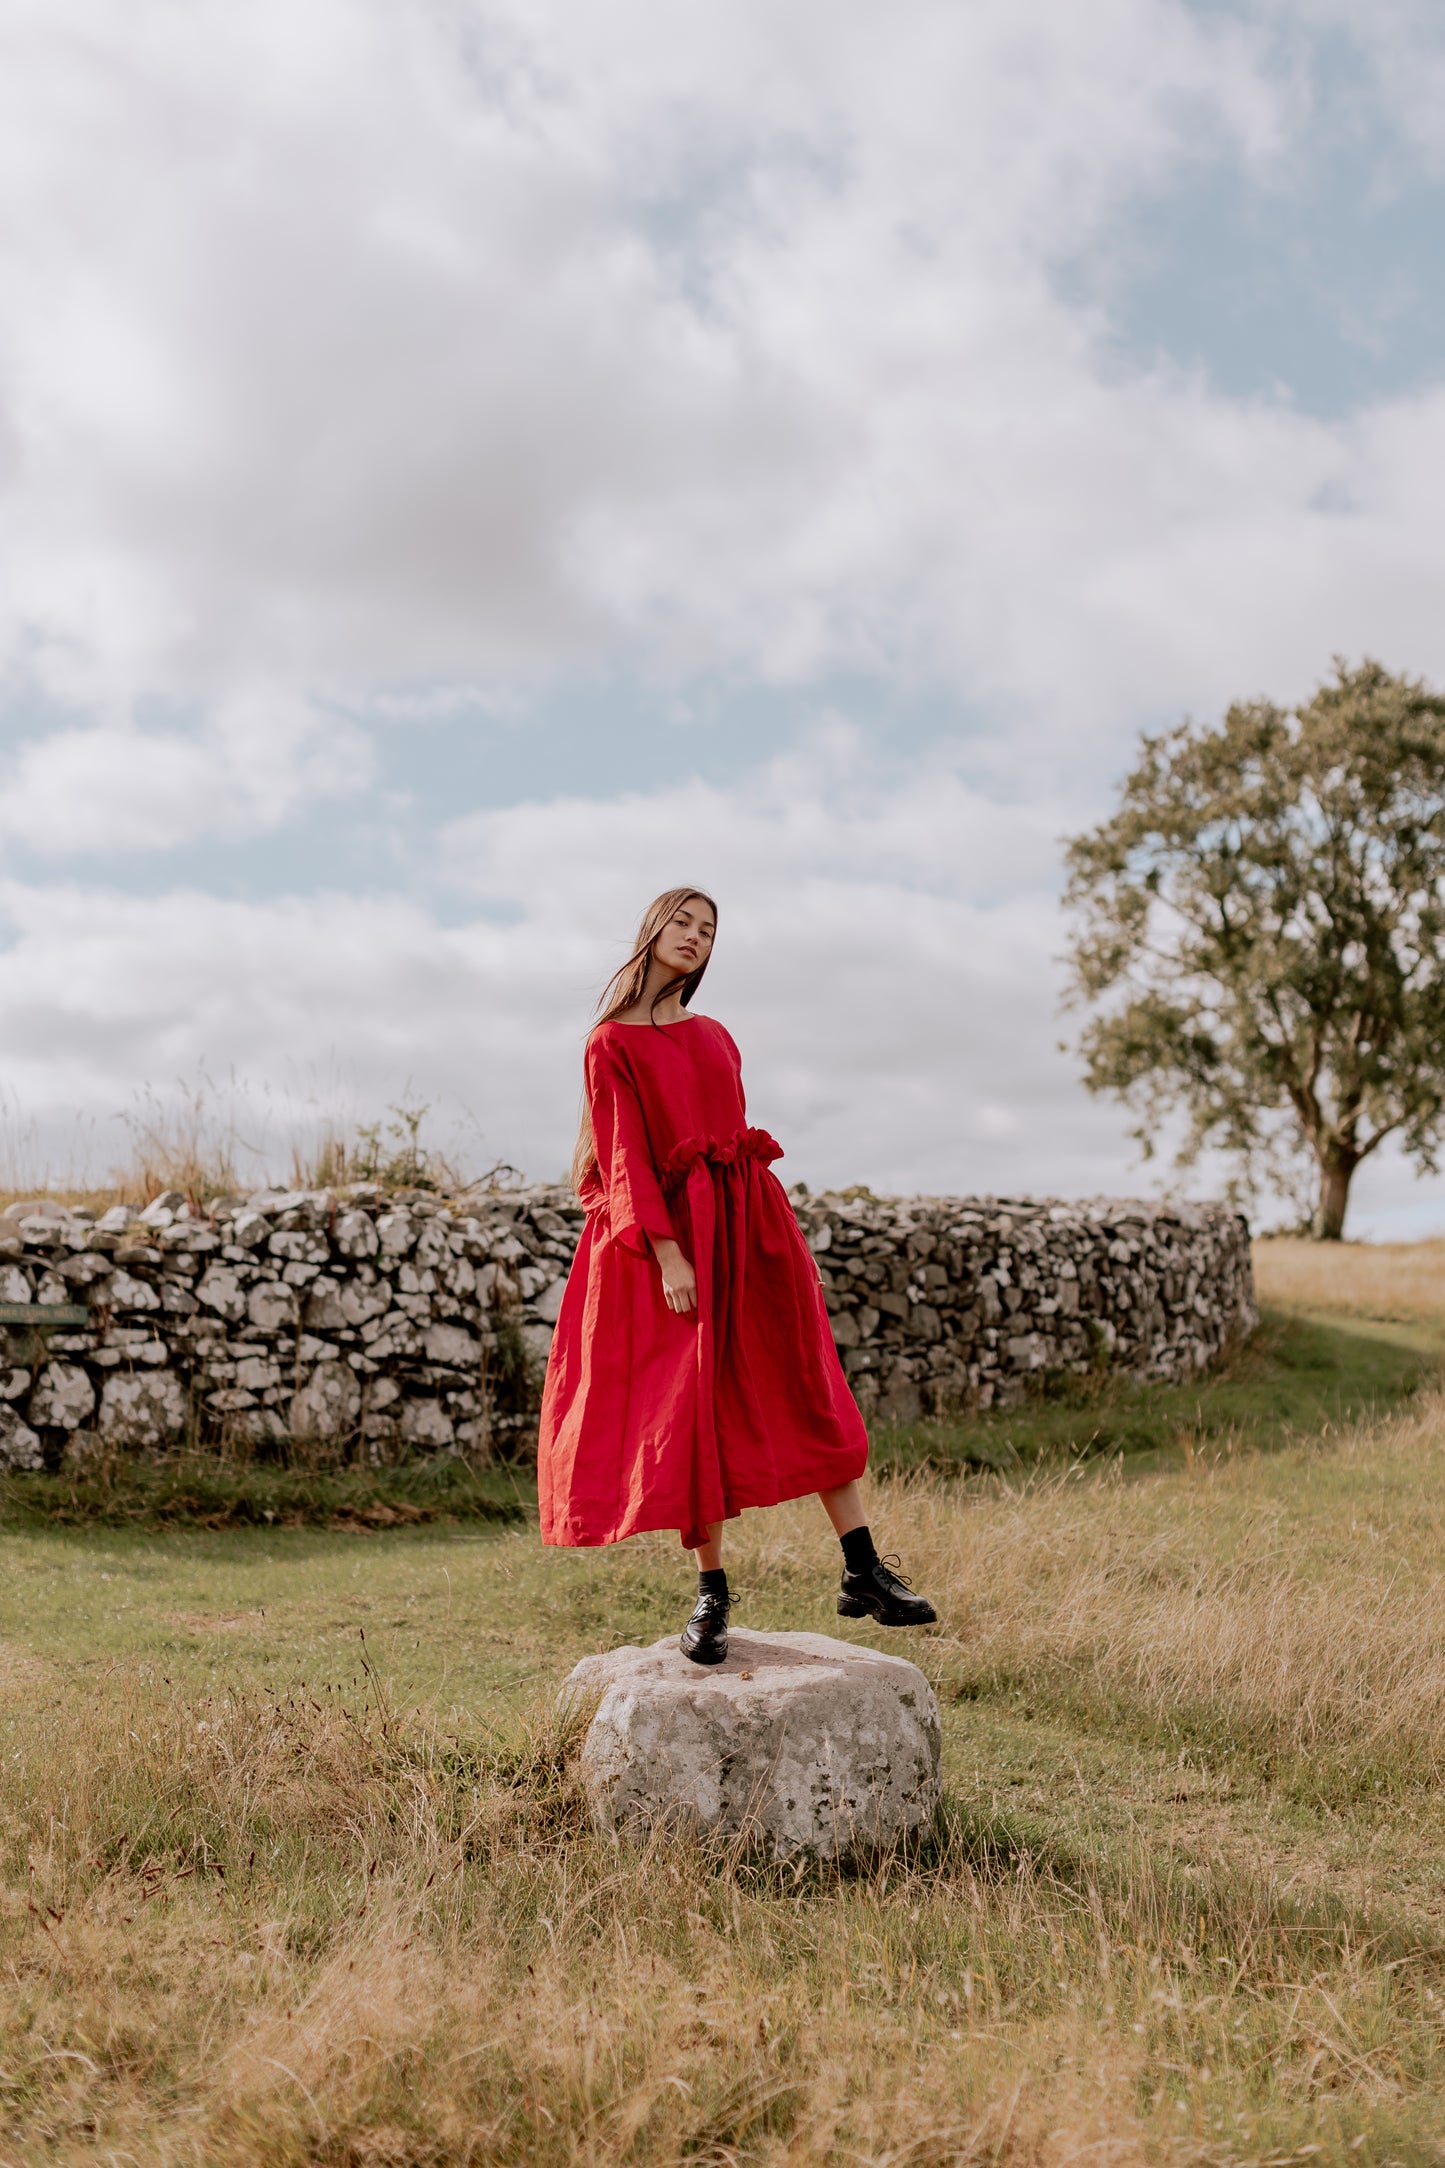 THE PUFF DRESS | POPPY | Our playful party dress this season.An effortless and feminine silhouette with a playful burst of puffed linen at the waist. Can be worn both ways, with 'V' to the front or back. The 'poppy' colourway is vibrant and fun. Created w